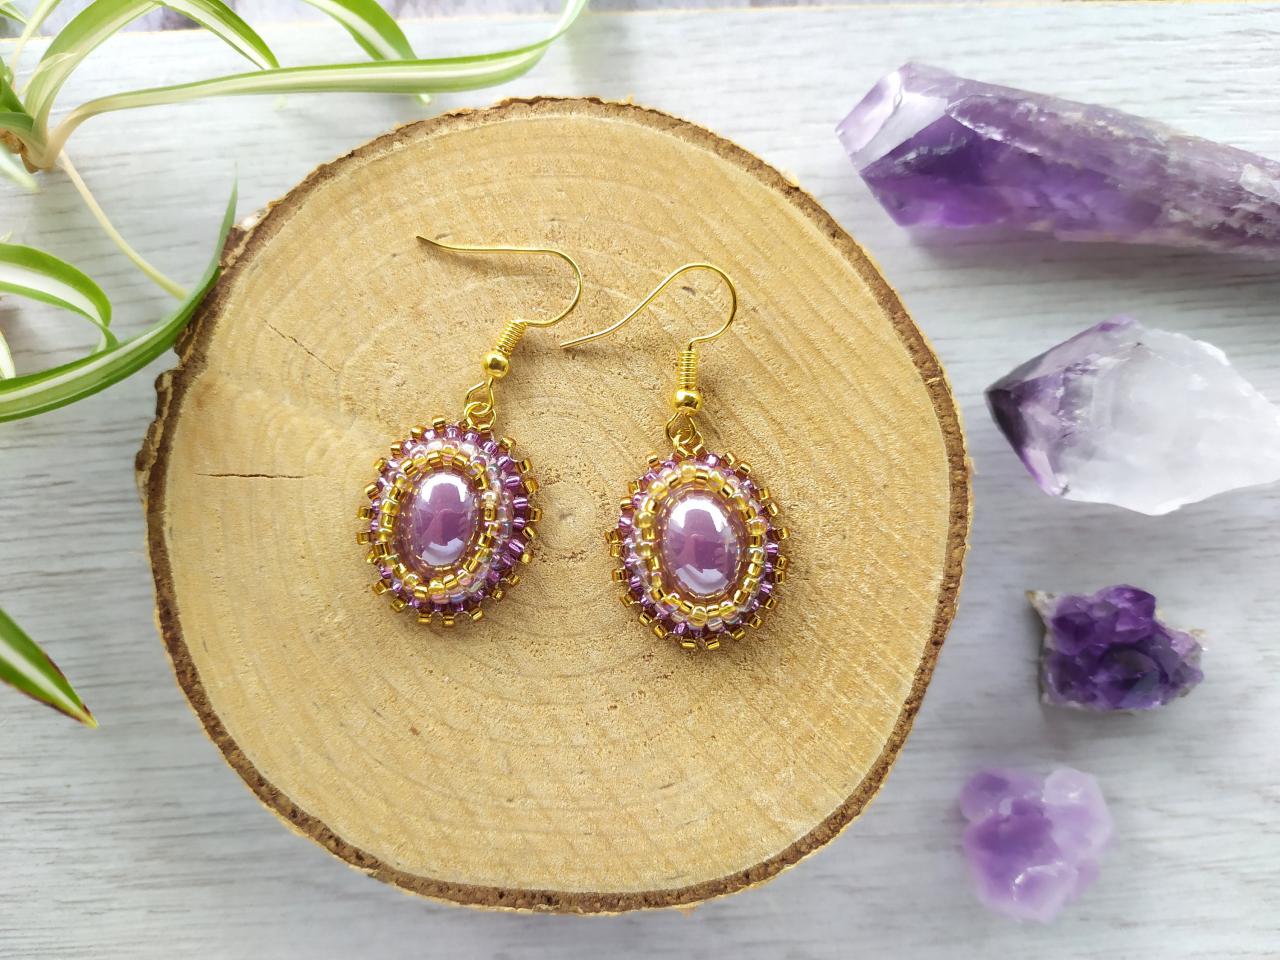 Lavender Purple And Gold Earrings, Bead Embroidered Seed Beads Earrings With Porcelain Cabochon, Purple Boho Dangles, Elegant Delicate Drop